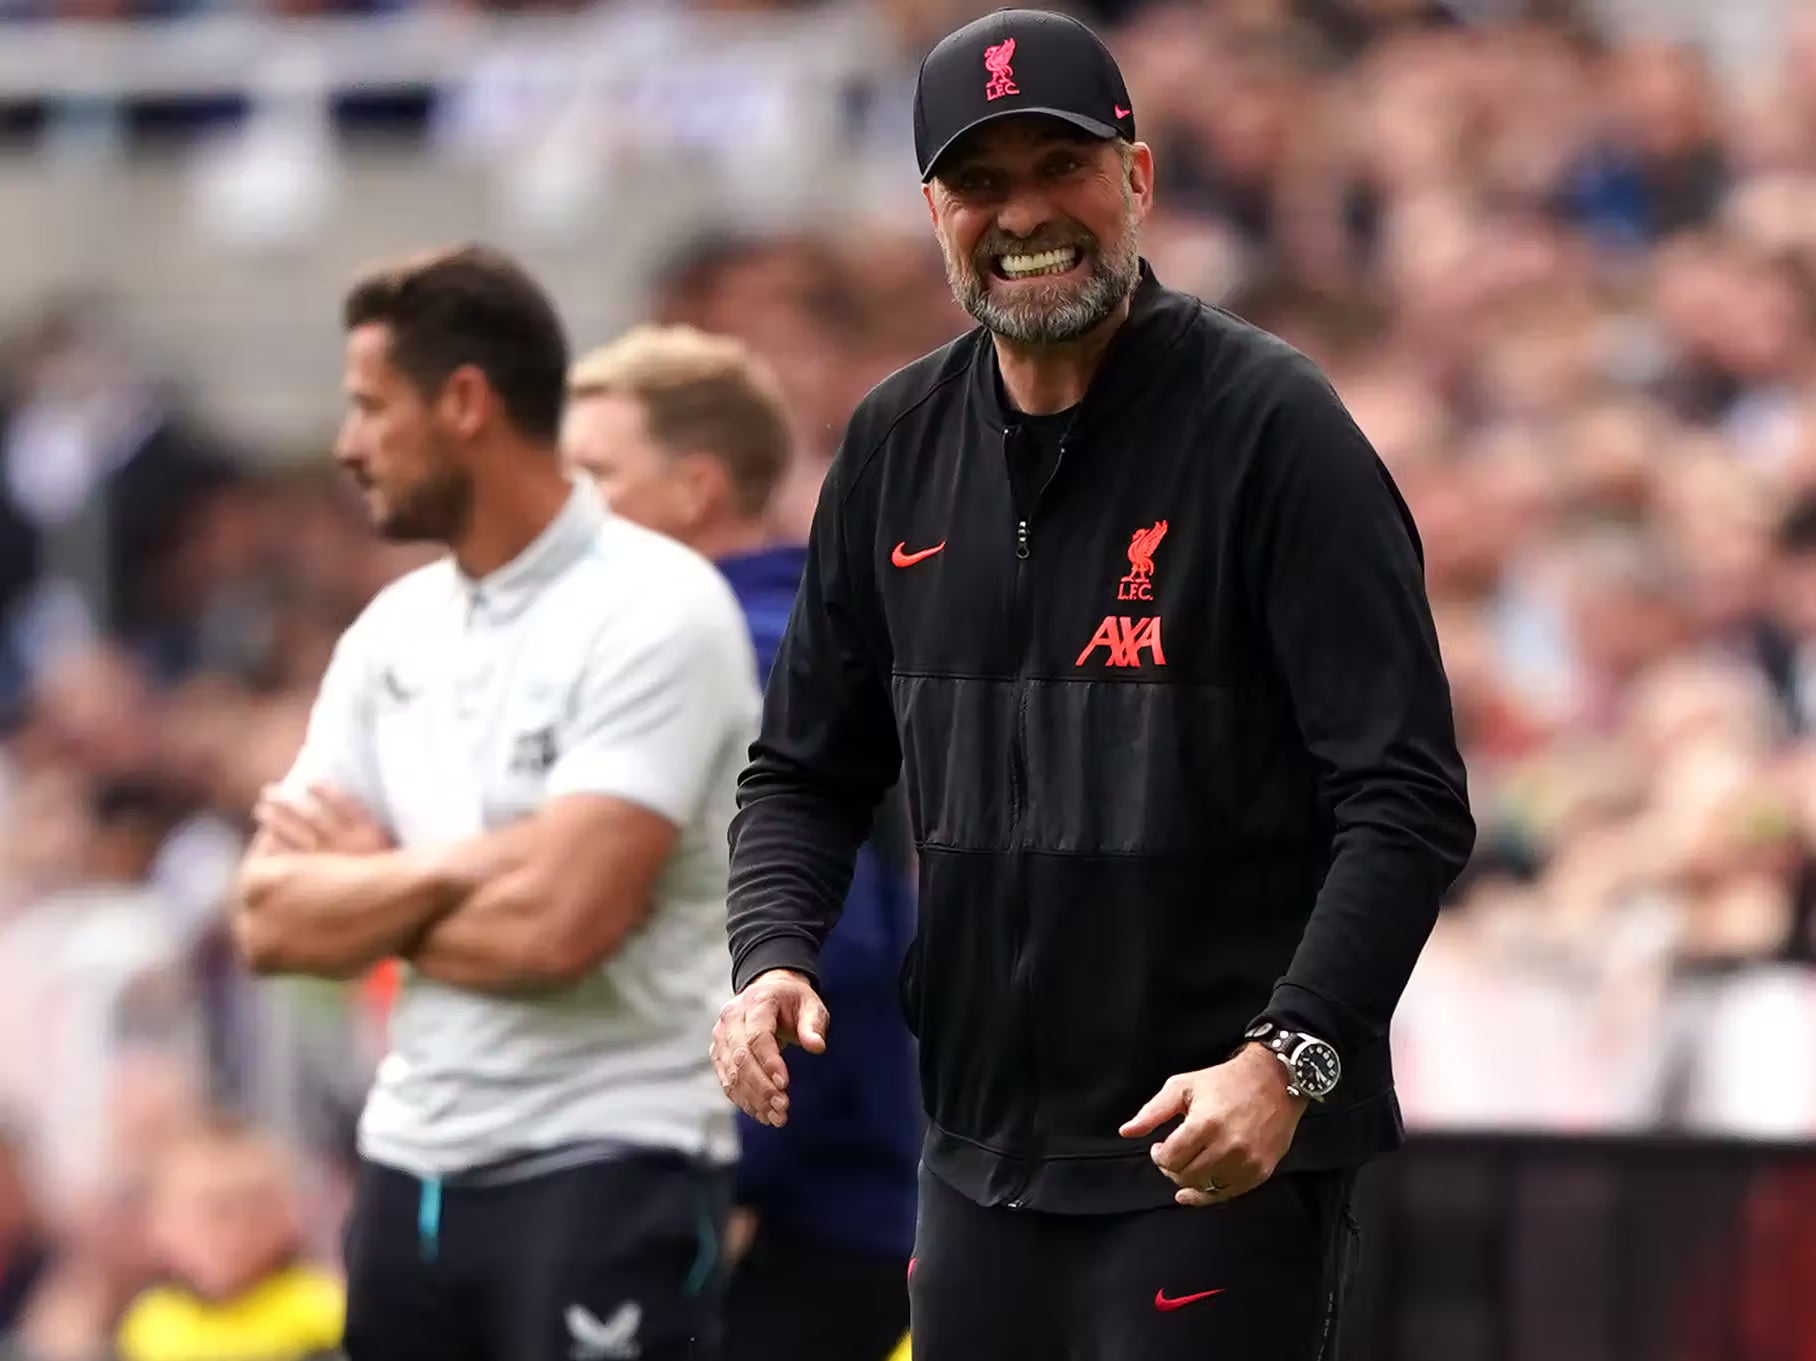 Liverpool manager Jurgen Klopp was a happy man after Saturday’s Premier League victory at Newcastle (Owen Humphreys/PA)